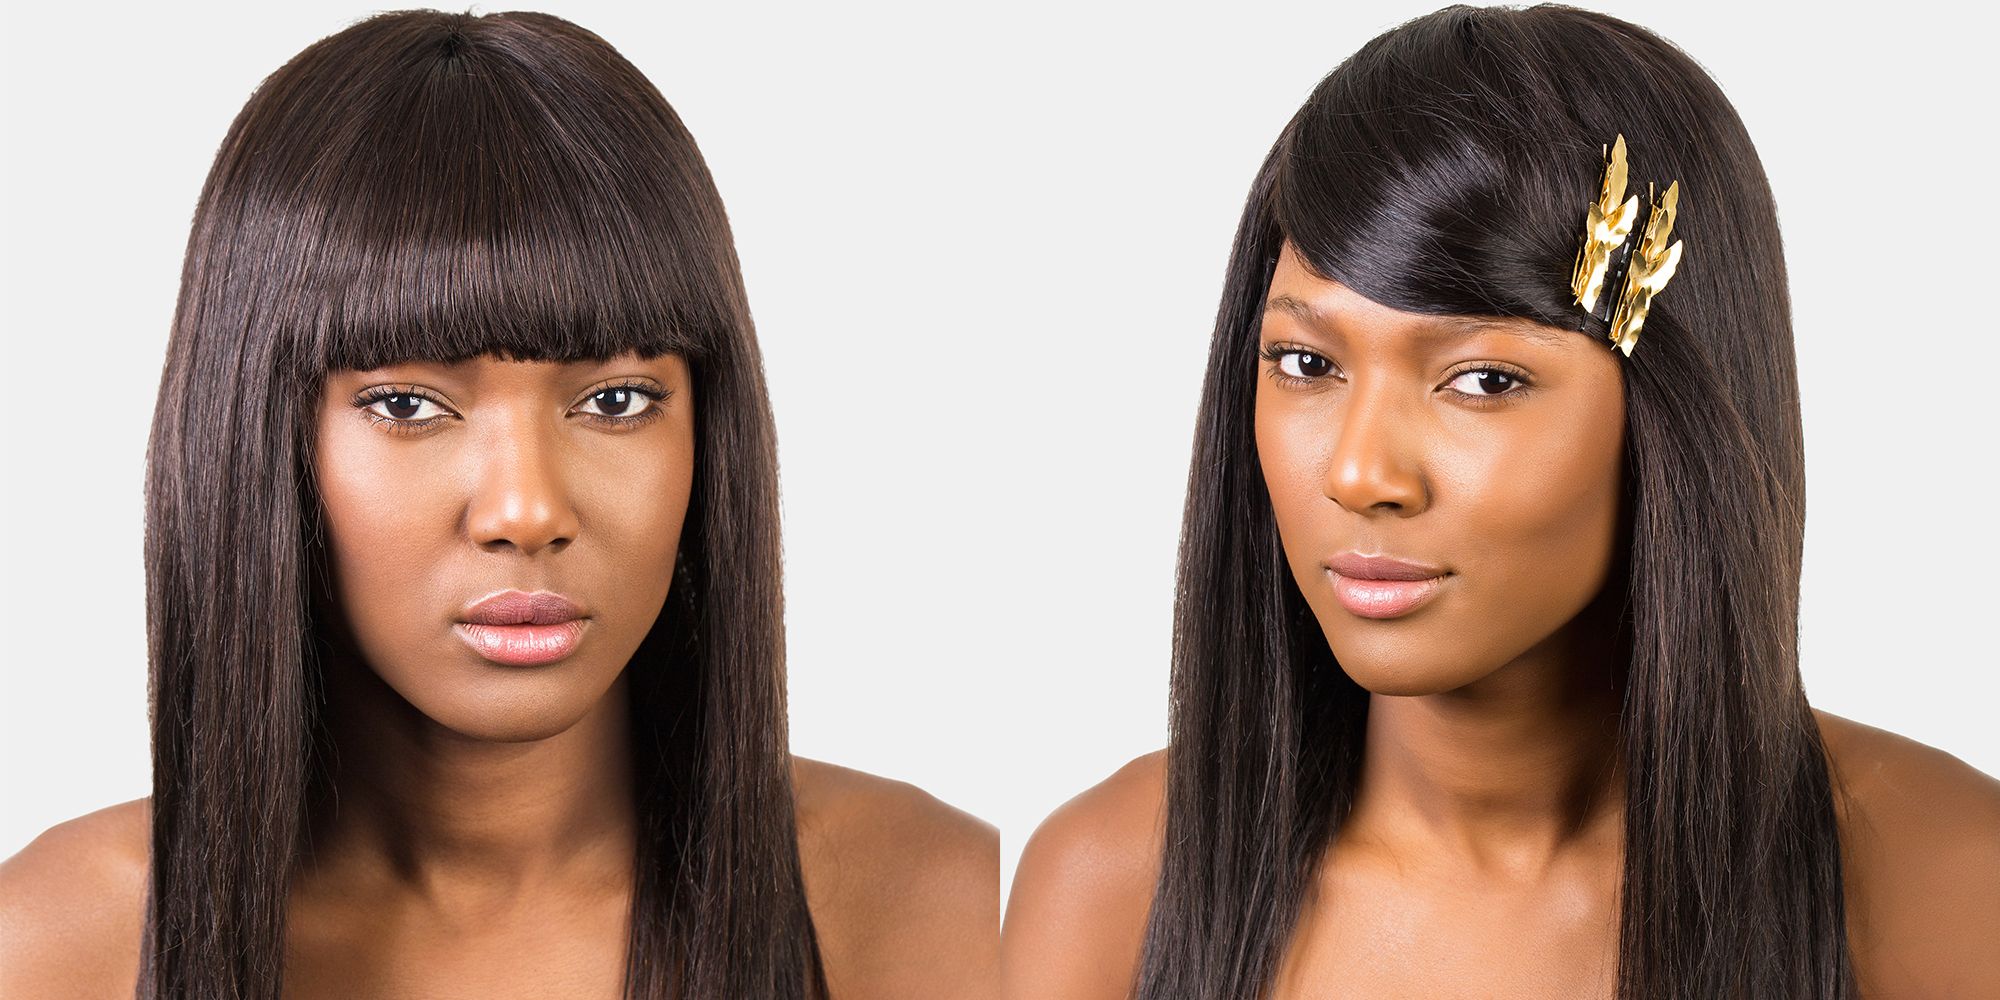 How To Style Bangs - 5 Hairstyles To Keep Your Bangs Out Of Your Face